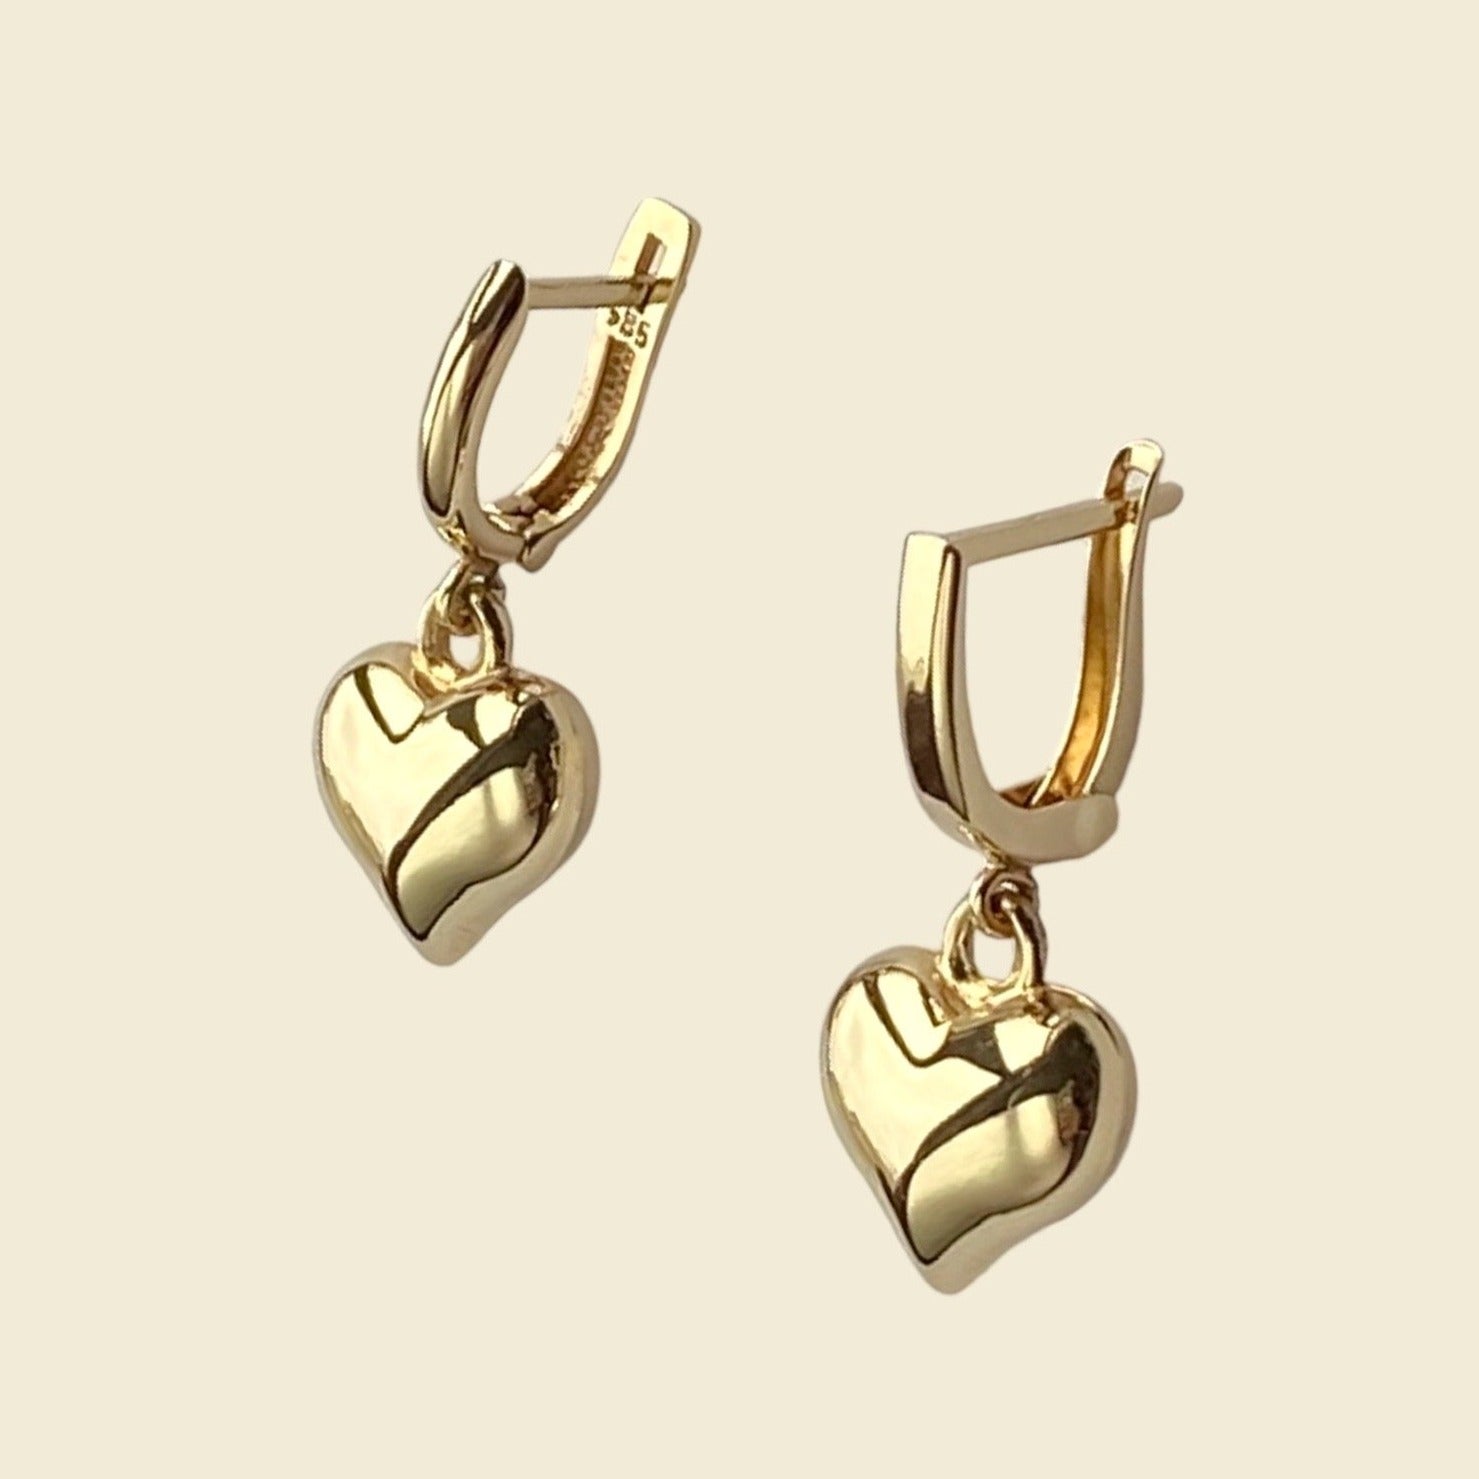 Aurora is handcrafted using only 14 karat solid gold, featuring a puffy heart pendant on hinged closure mini hoop. 